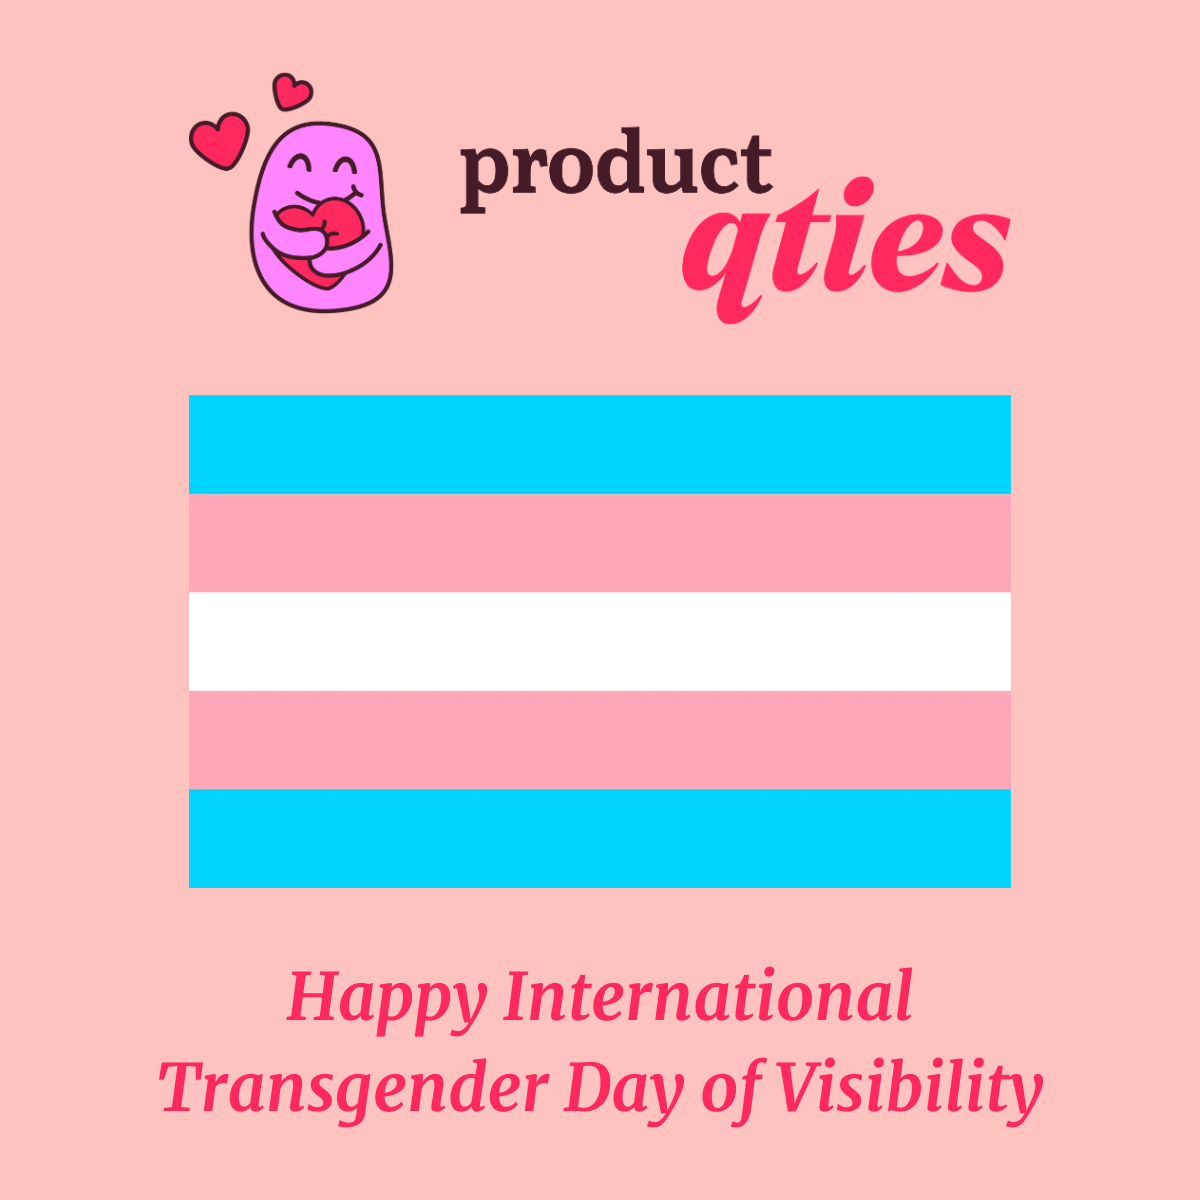 A purple jellybean hugging a heart next to text that says product qties above the transgender flag in pink, white, and blue colors. At the bottom text says "Happy International Transgender Day of Visibility"